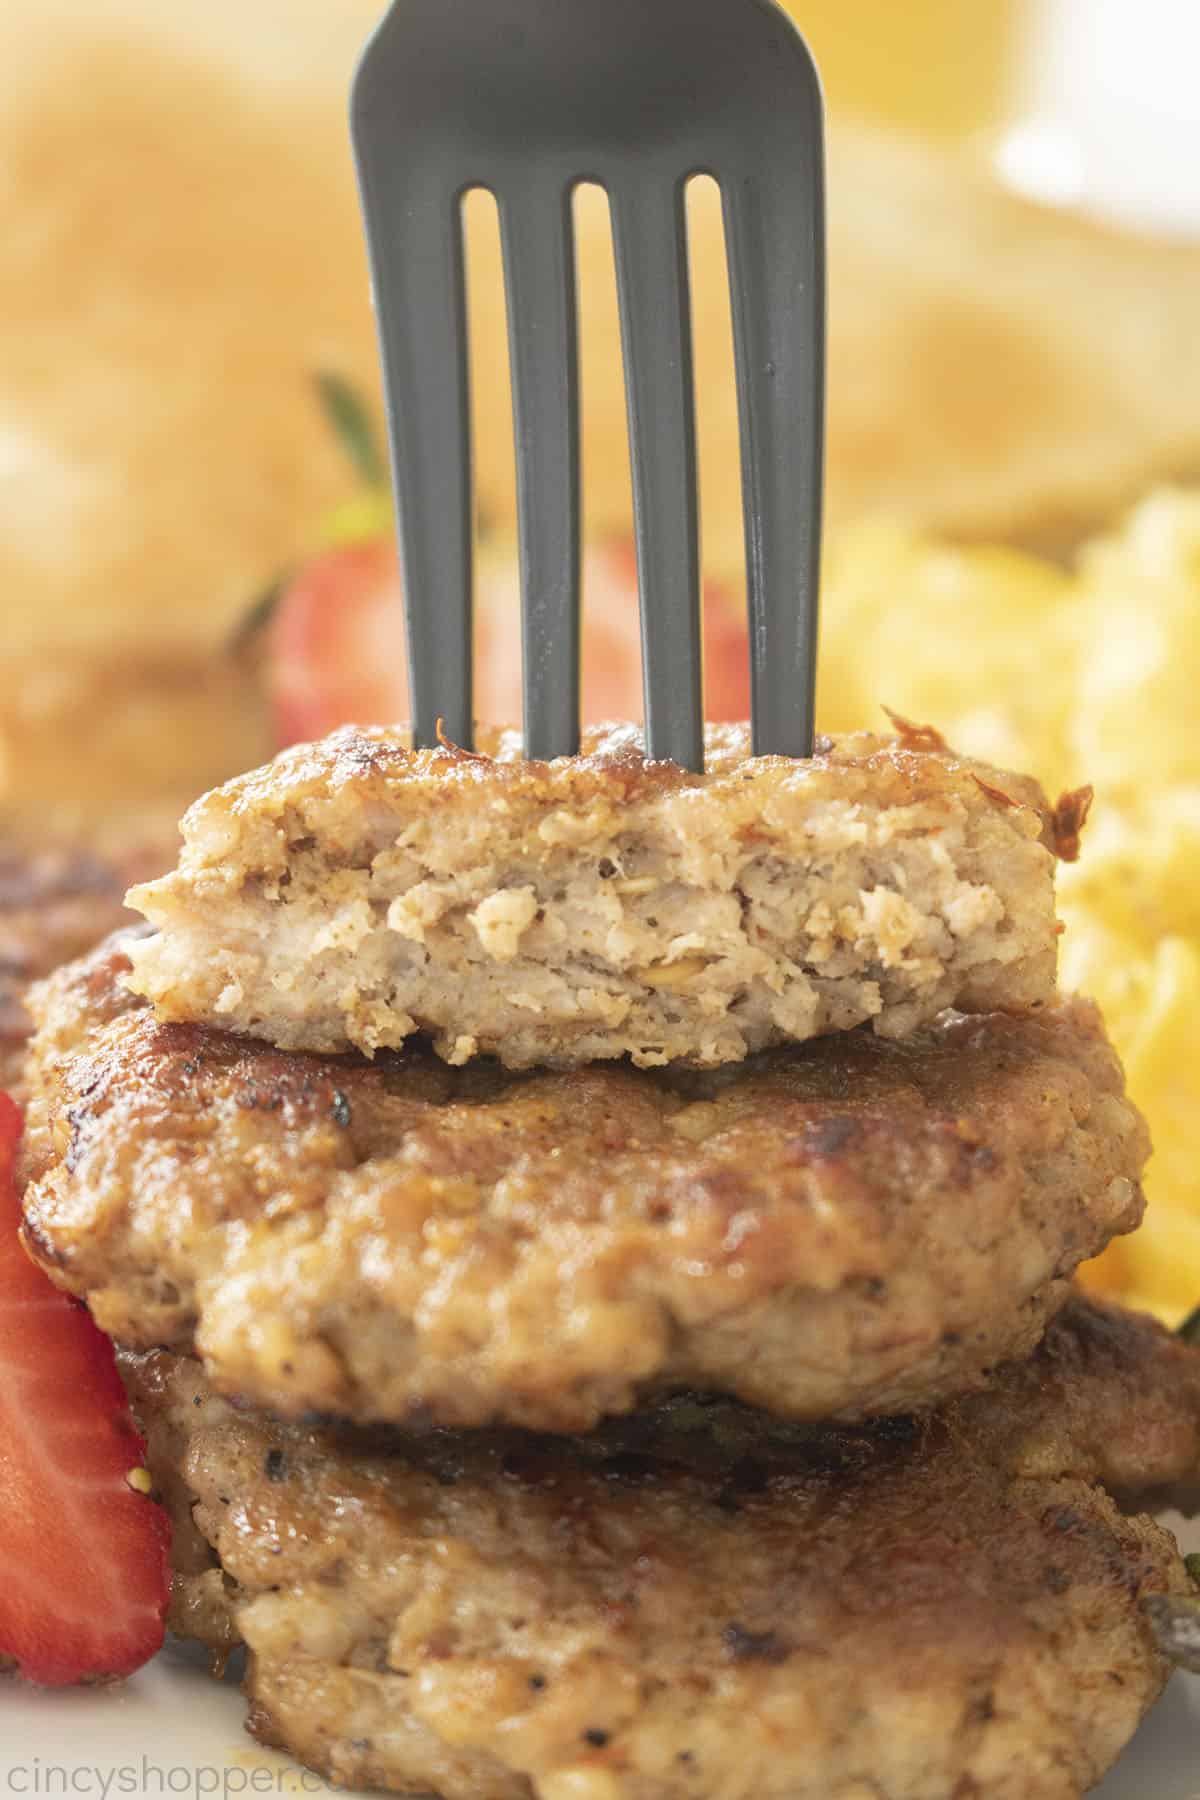 Stack of Breakfast Sausage Patties with a fork.